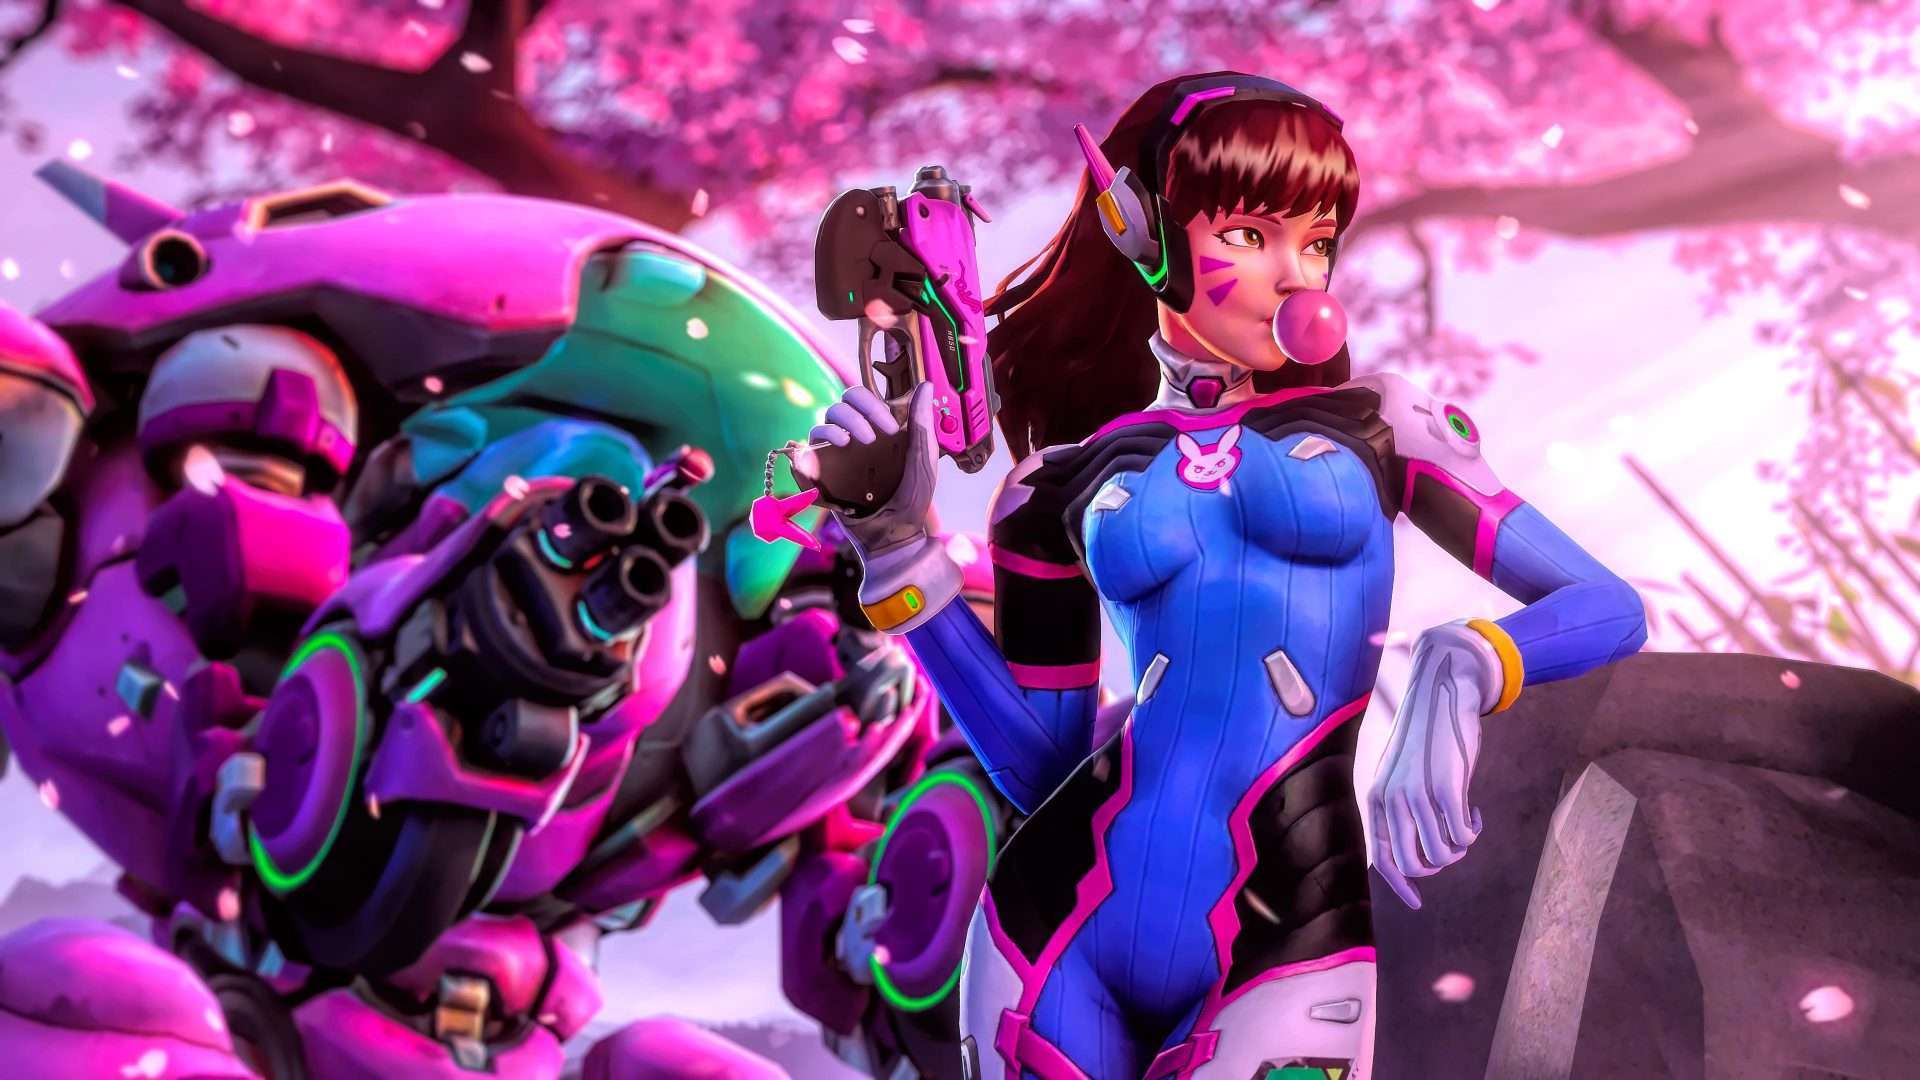 D.va was one Overwatch hero that avoided a ban this week, despite a huge play-rate in ranked and the Overwatch League.